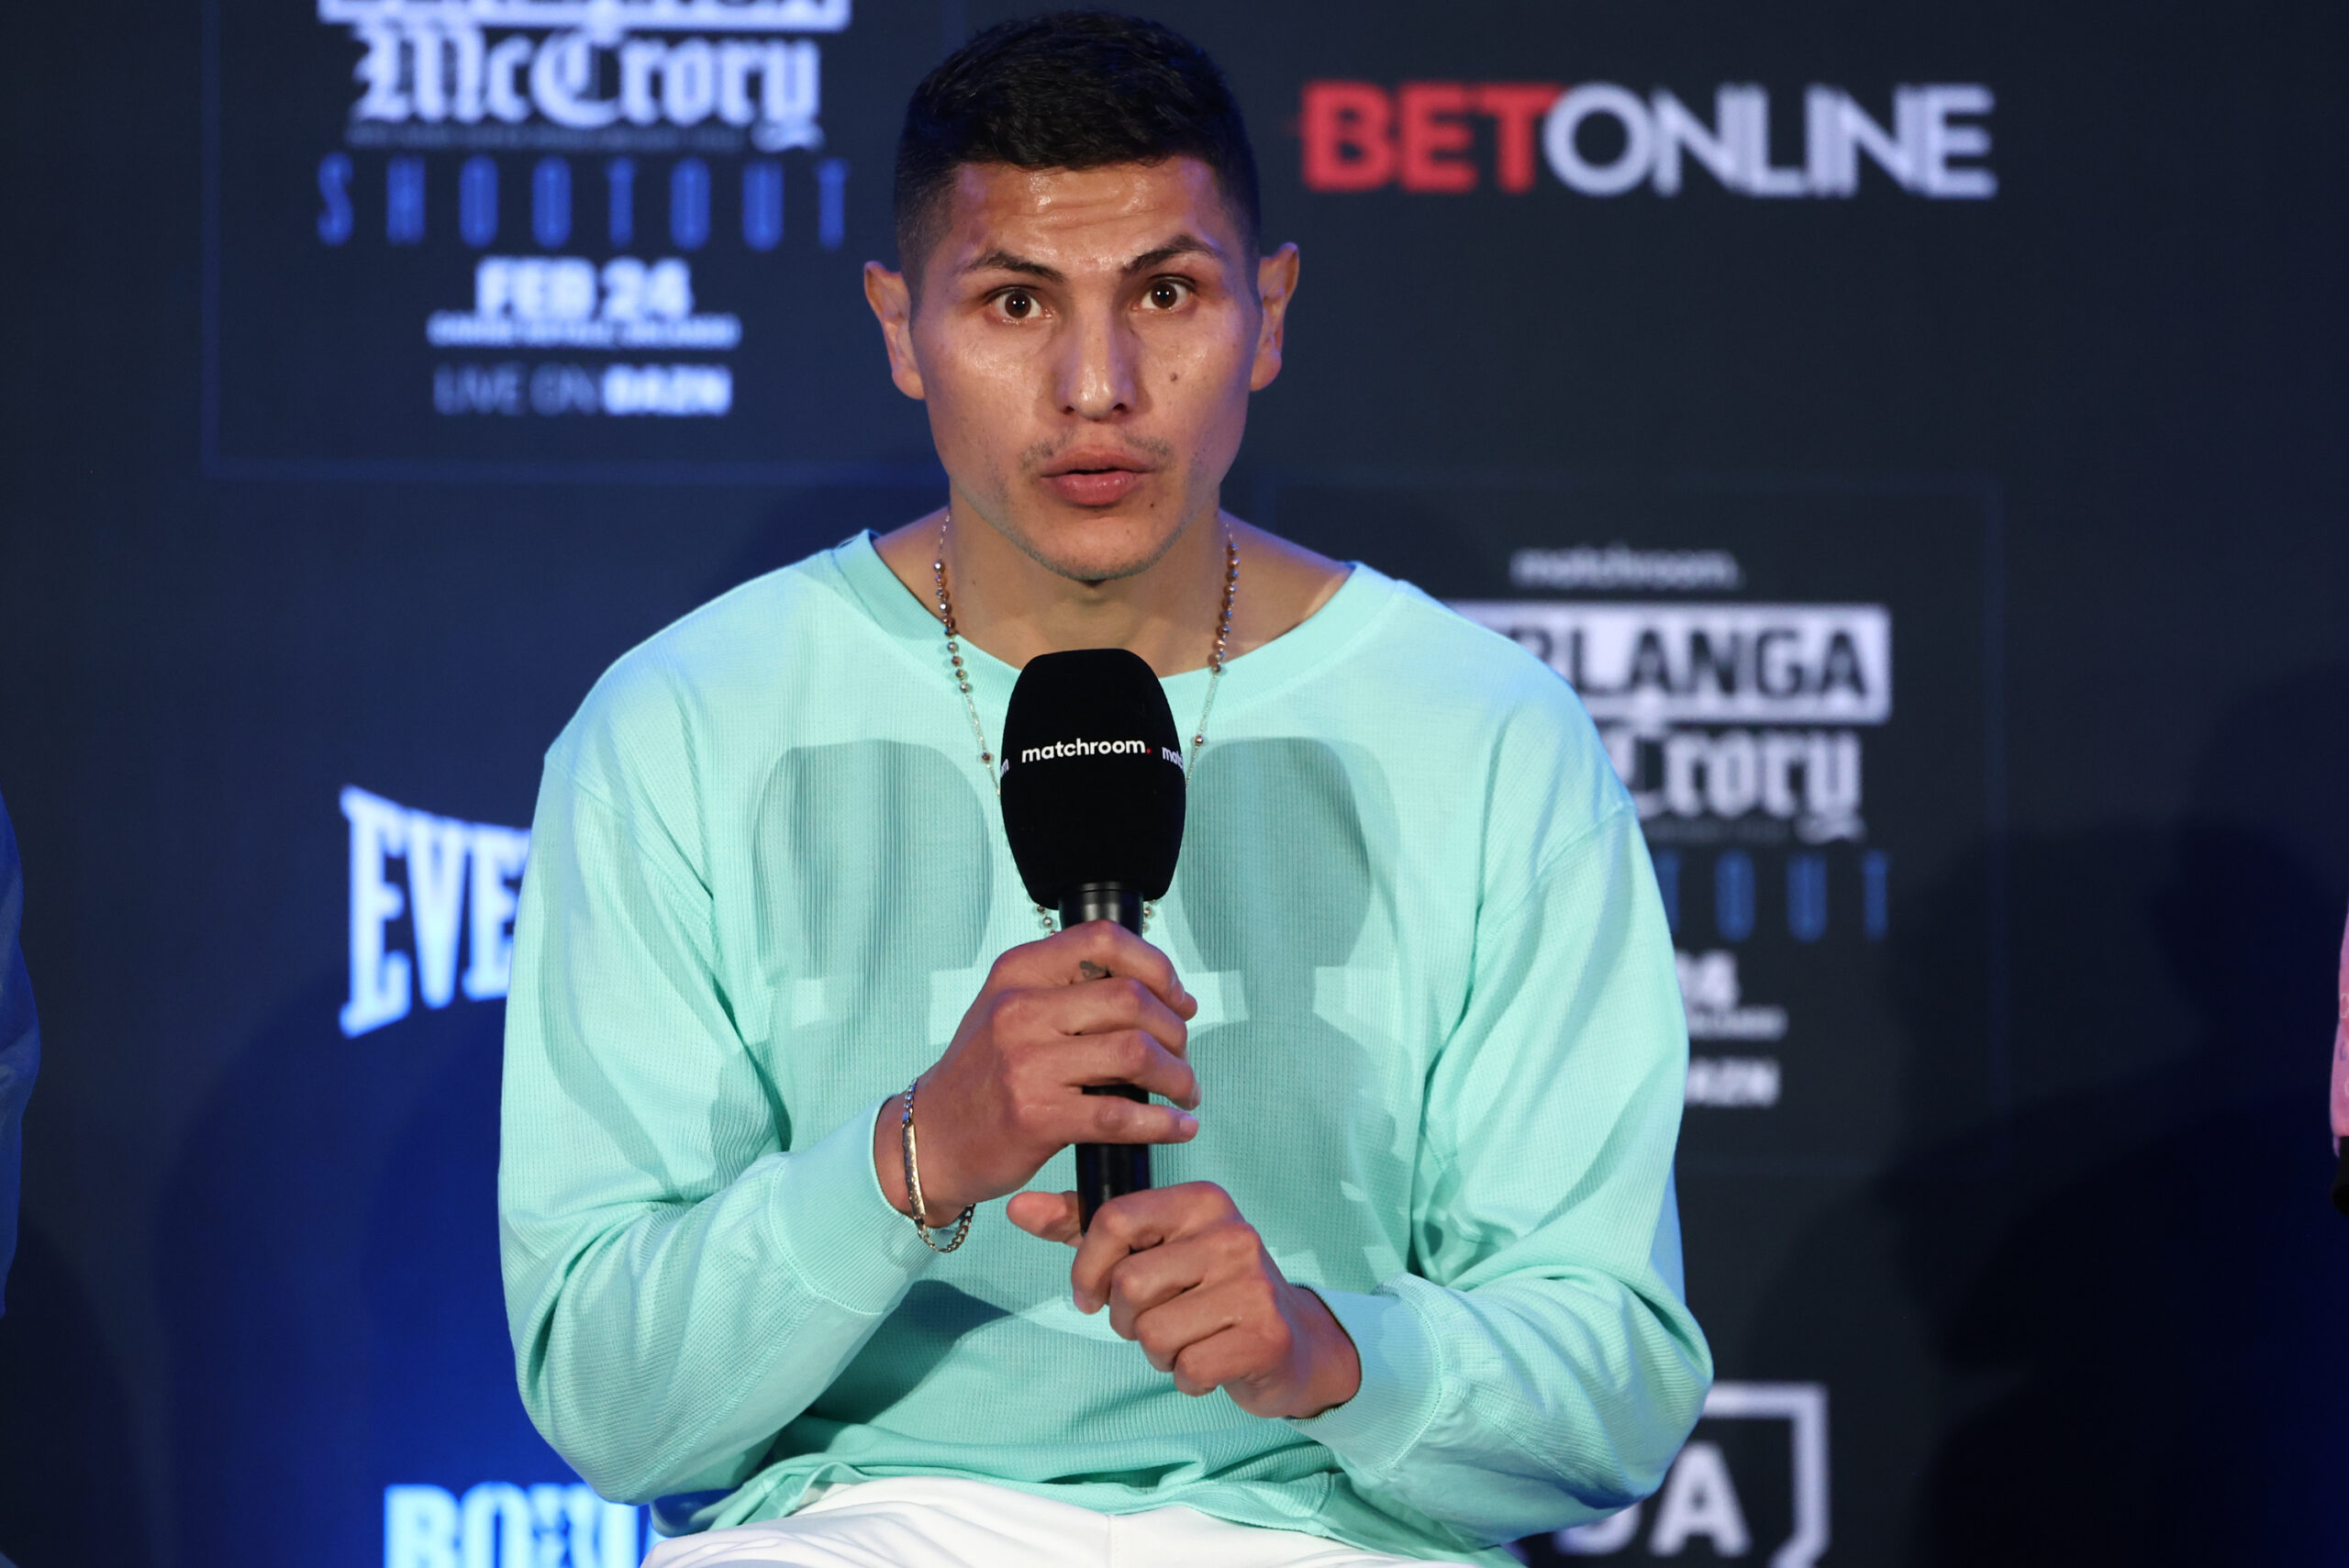 February 22, 2024; Orlando, FL; Pablo Cesar Cano speaks at the final press conference for his February 24, 2024 fight in Orlando, FL. (Foto: Ed Mulholland/Matchroom).